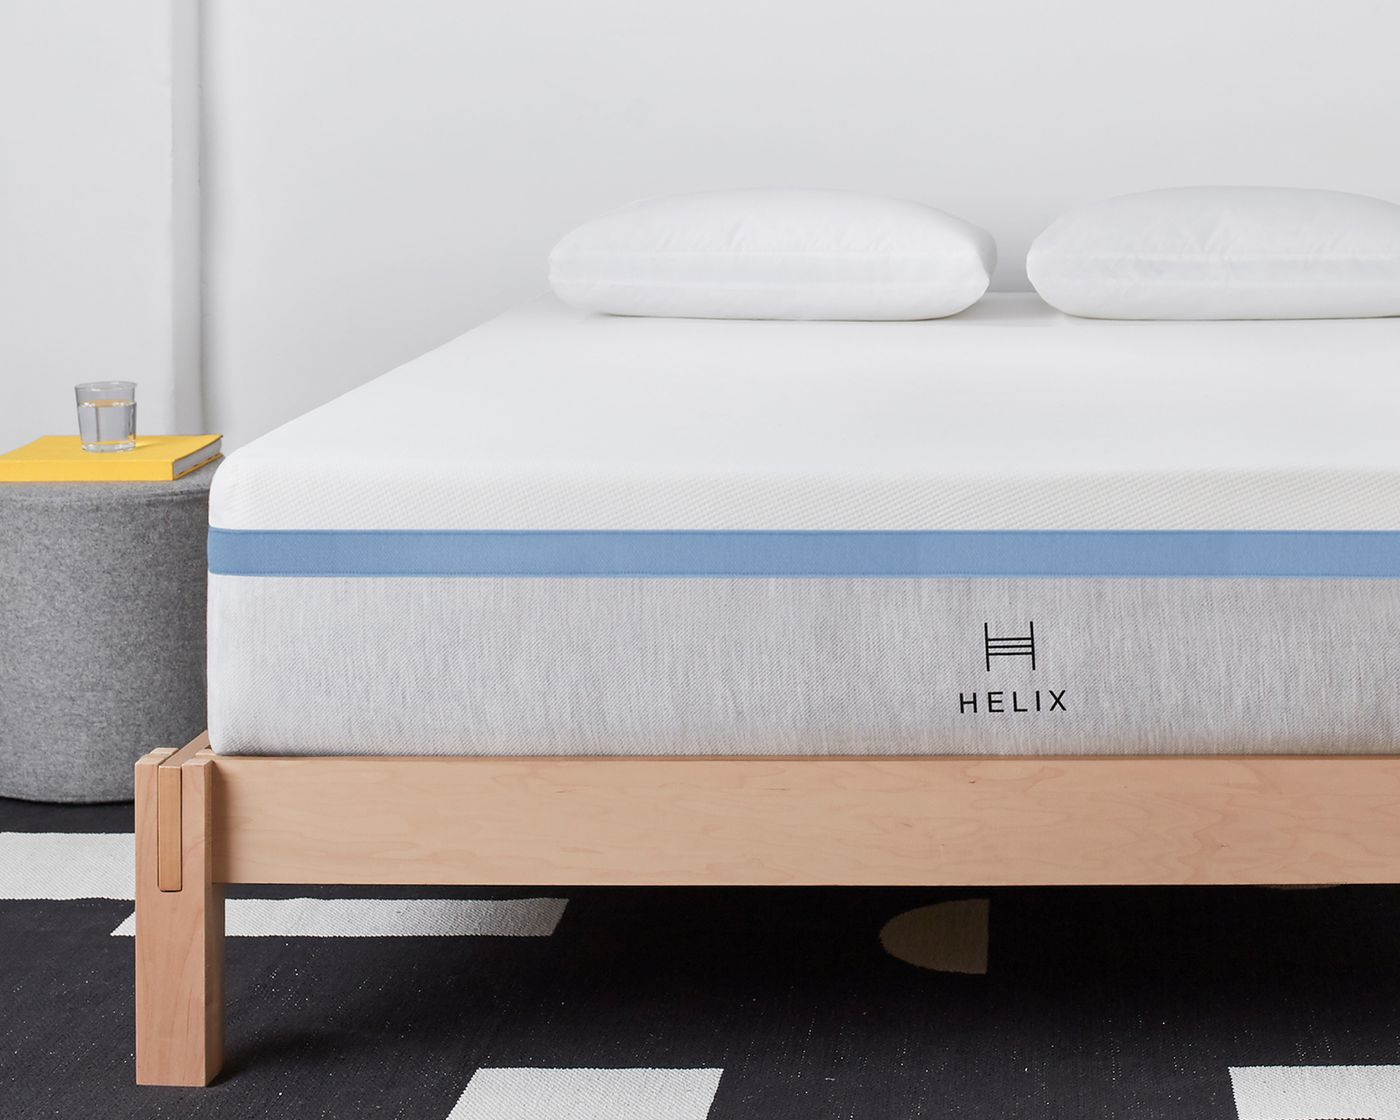 The Helix mattresses offer a range of options in terms of pressure relief, temperature control, and ease of movement.